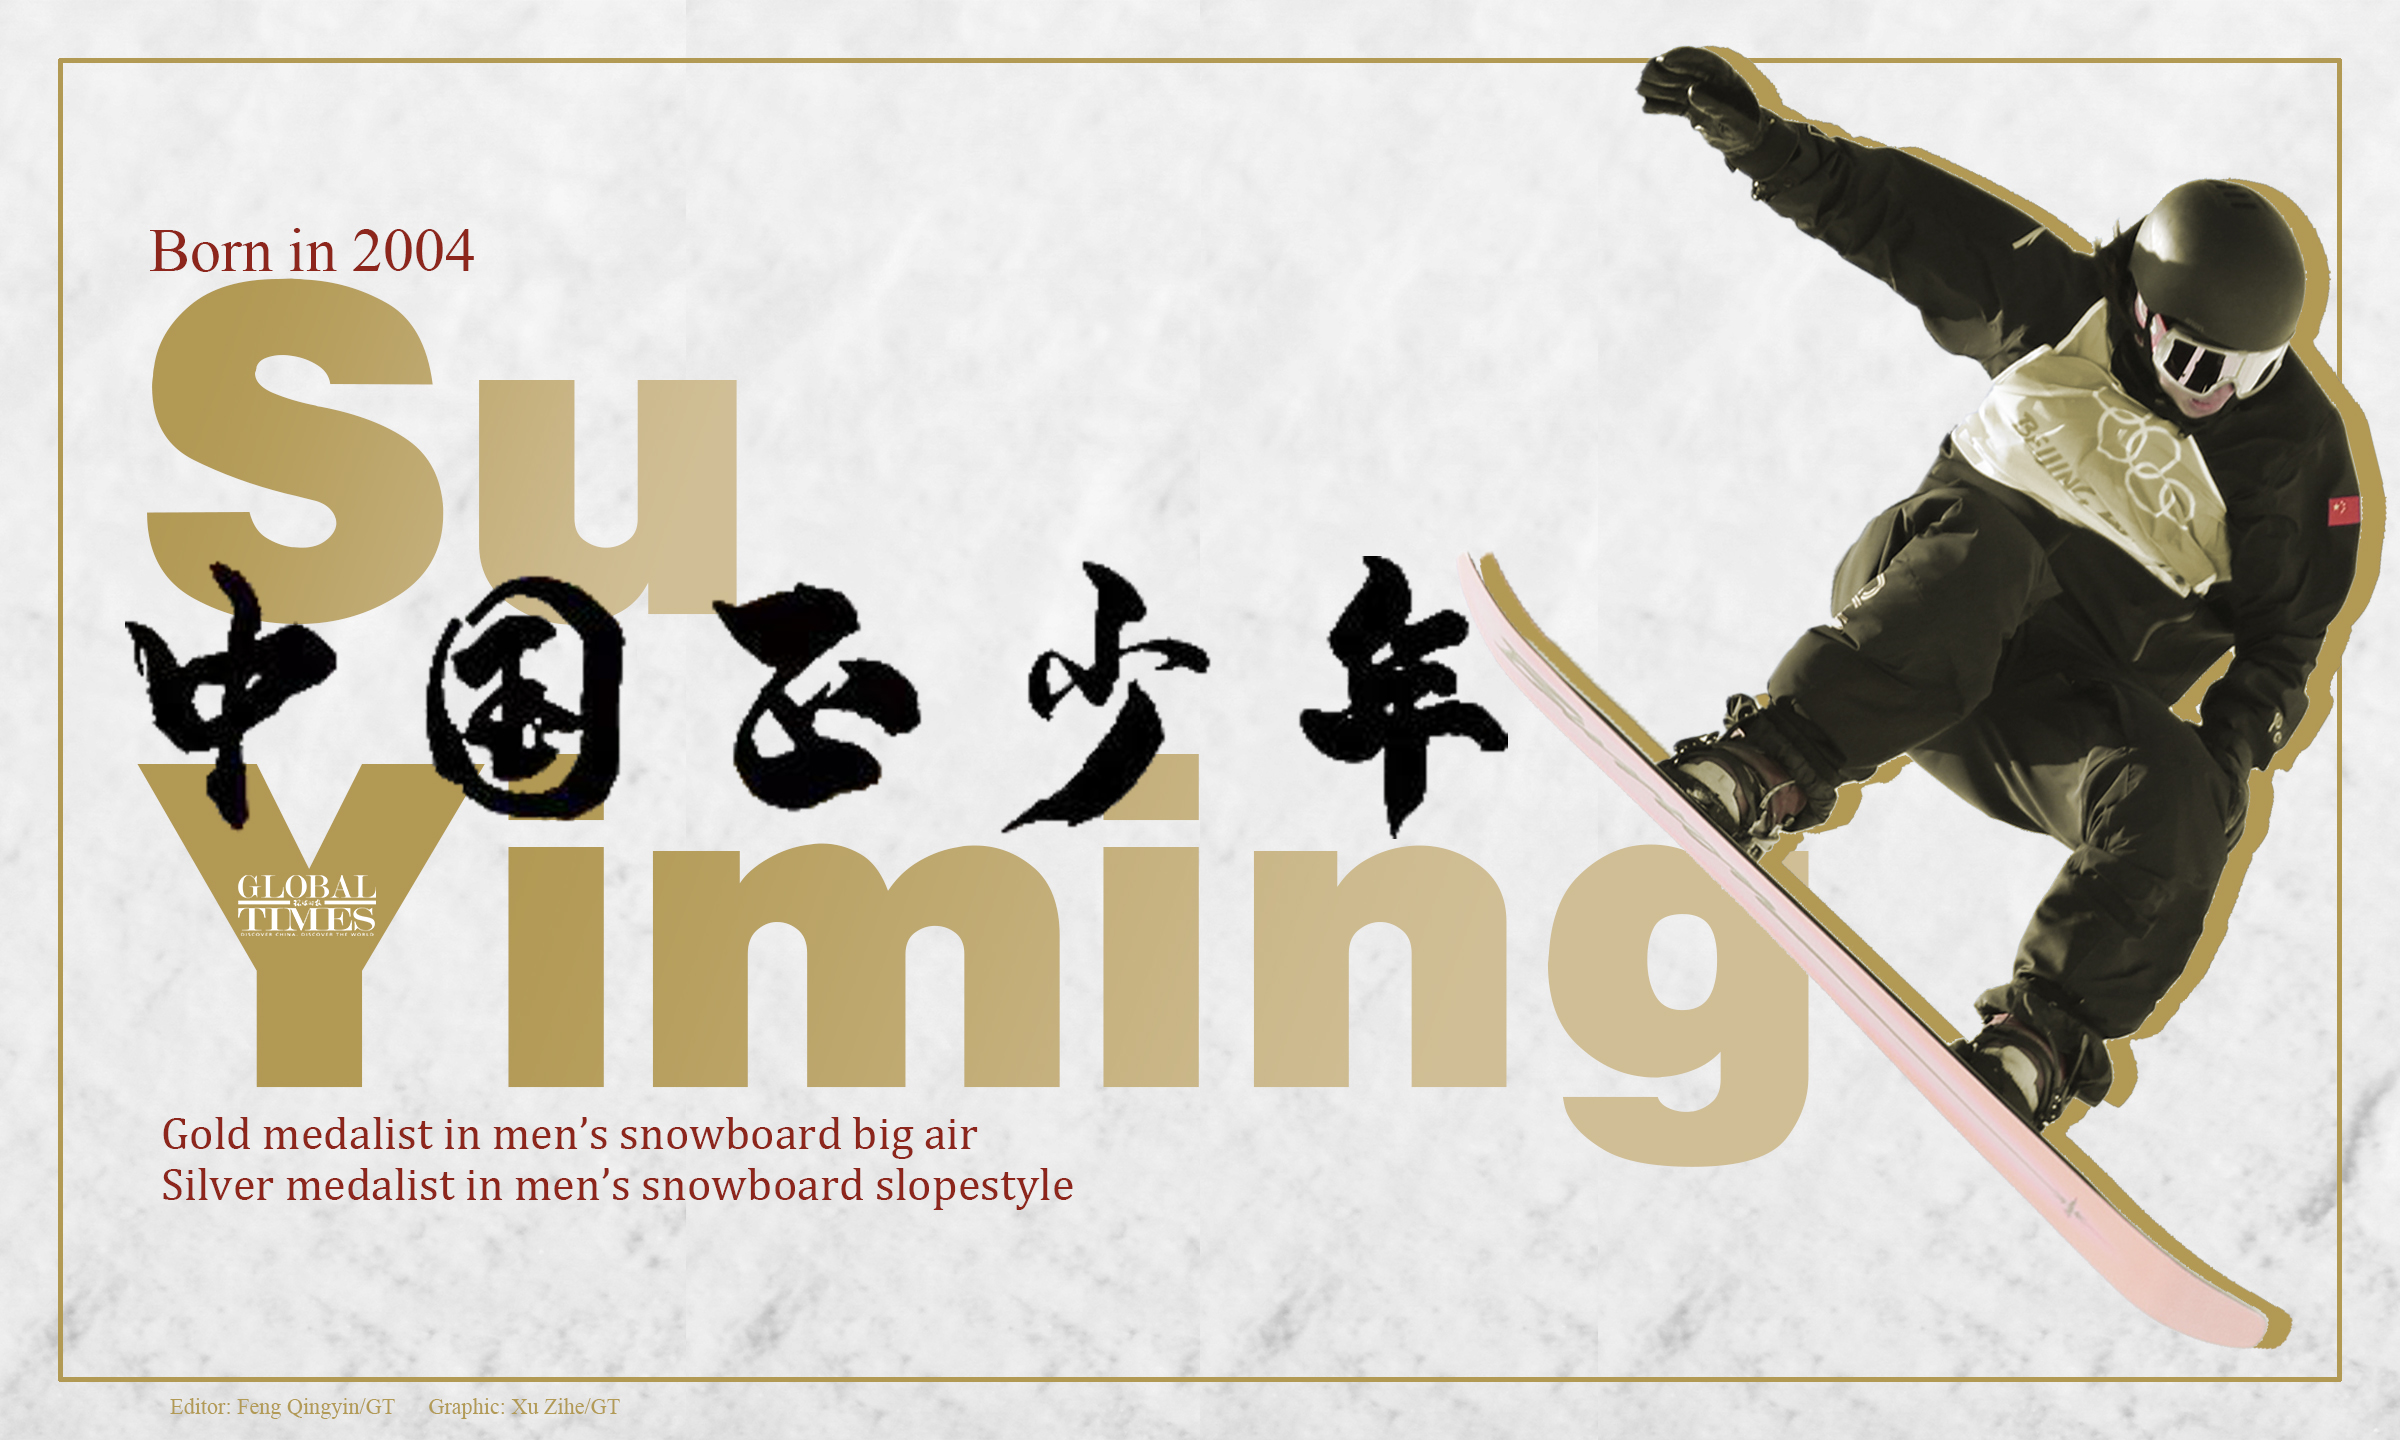 17-year-old Chinese athlete Su Yiming won the 6th gold medal for Team China in the men’s snowboard big air at Beijing 2022 on Tue. He made history by bagging one gold and one silver at this year's Olympics. Graphic: Xu Zihe/GT